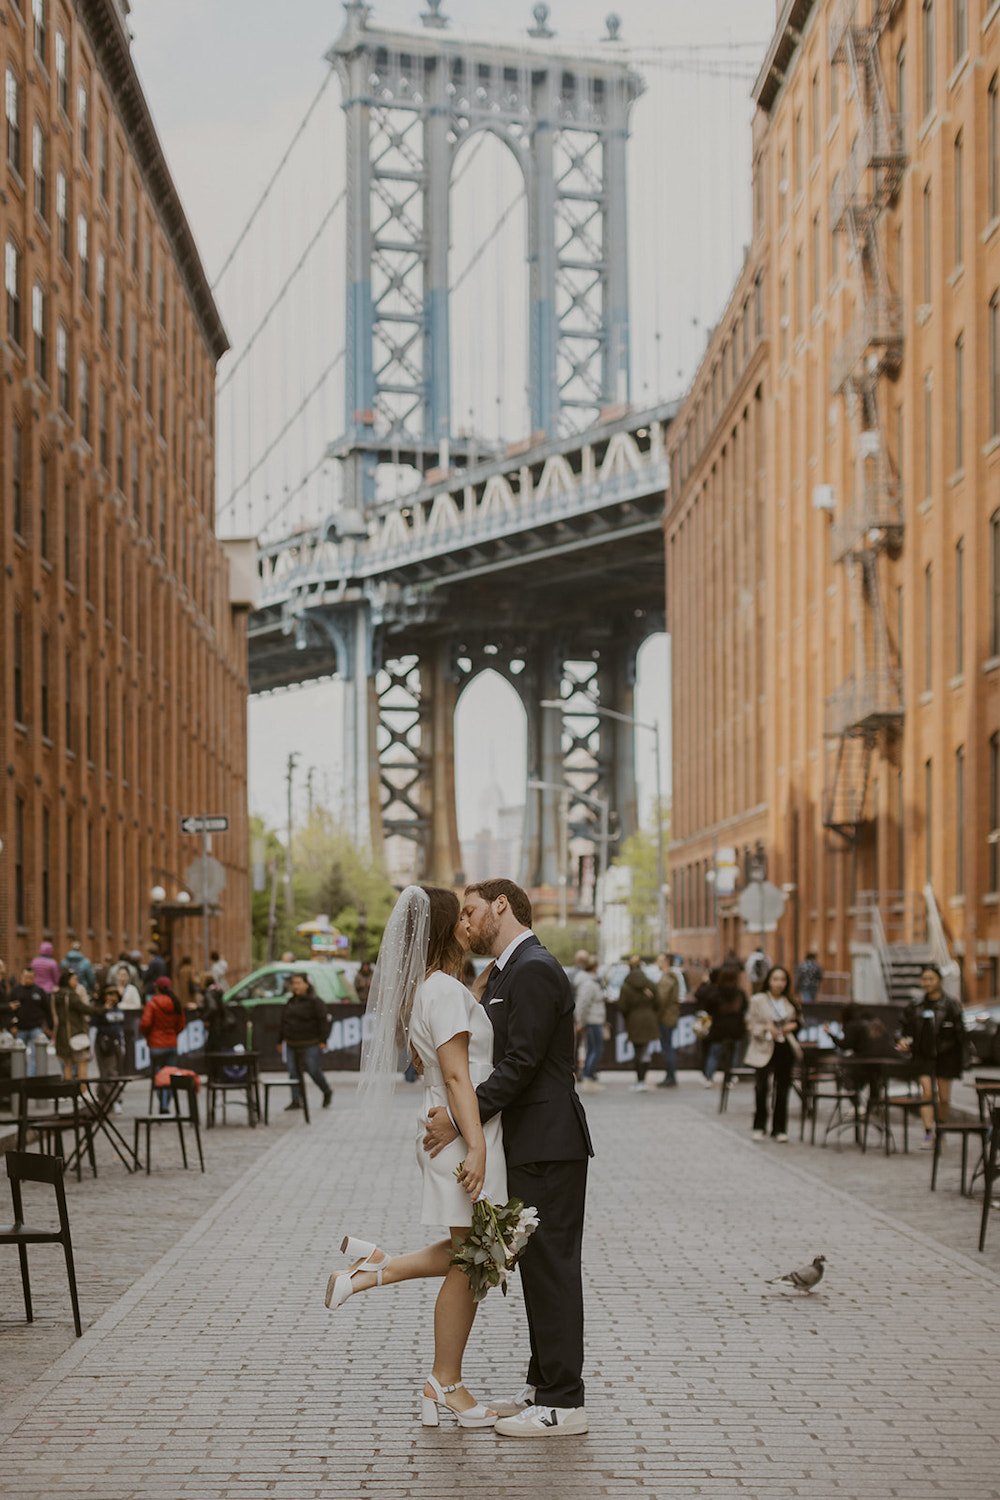 Husband kisses his new wife in the DUMBO district with the Brooklyn Bridge and historic brick building background.